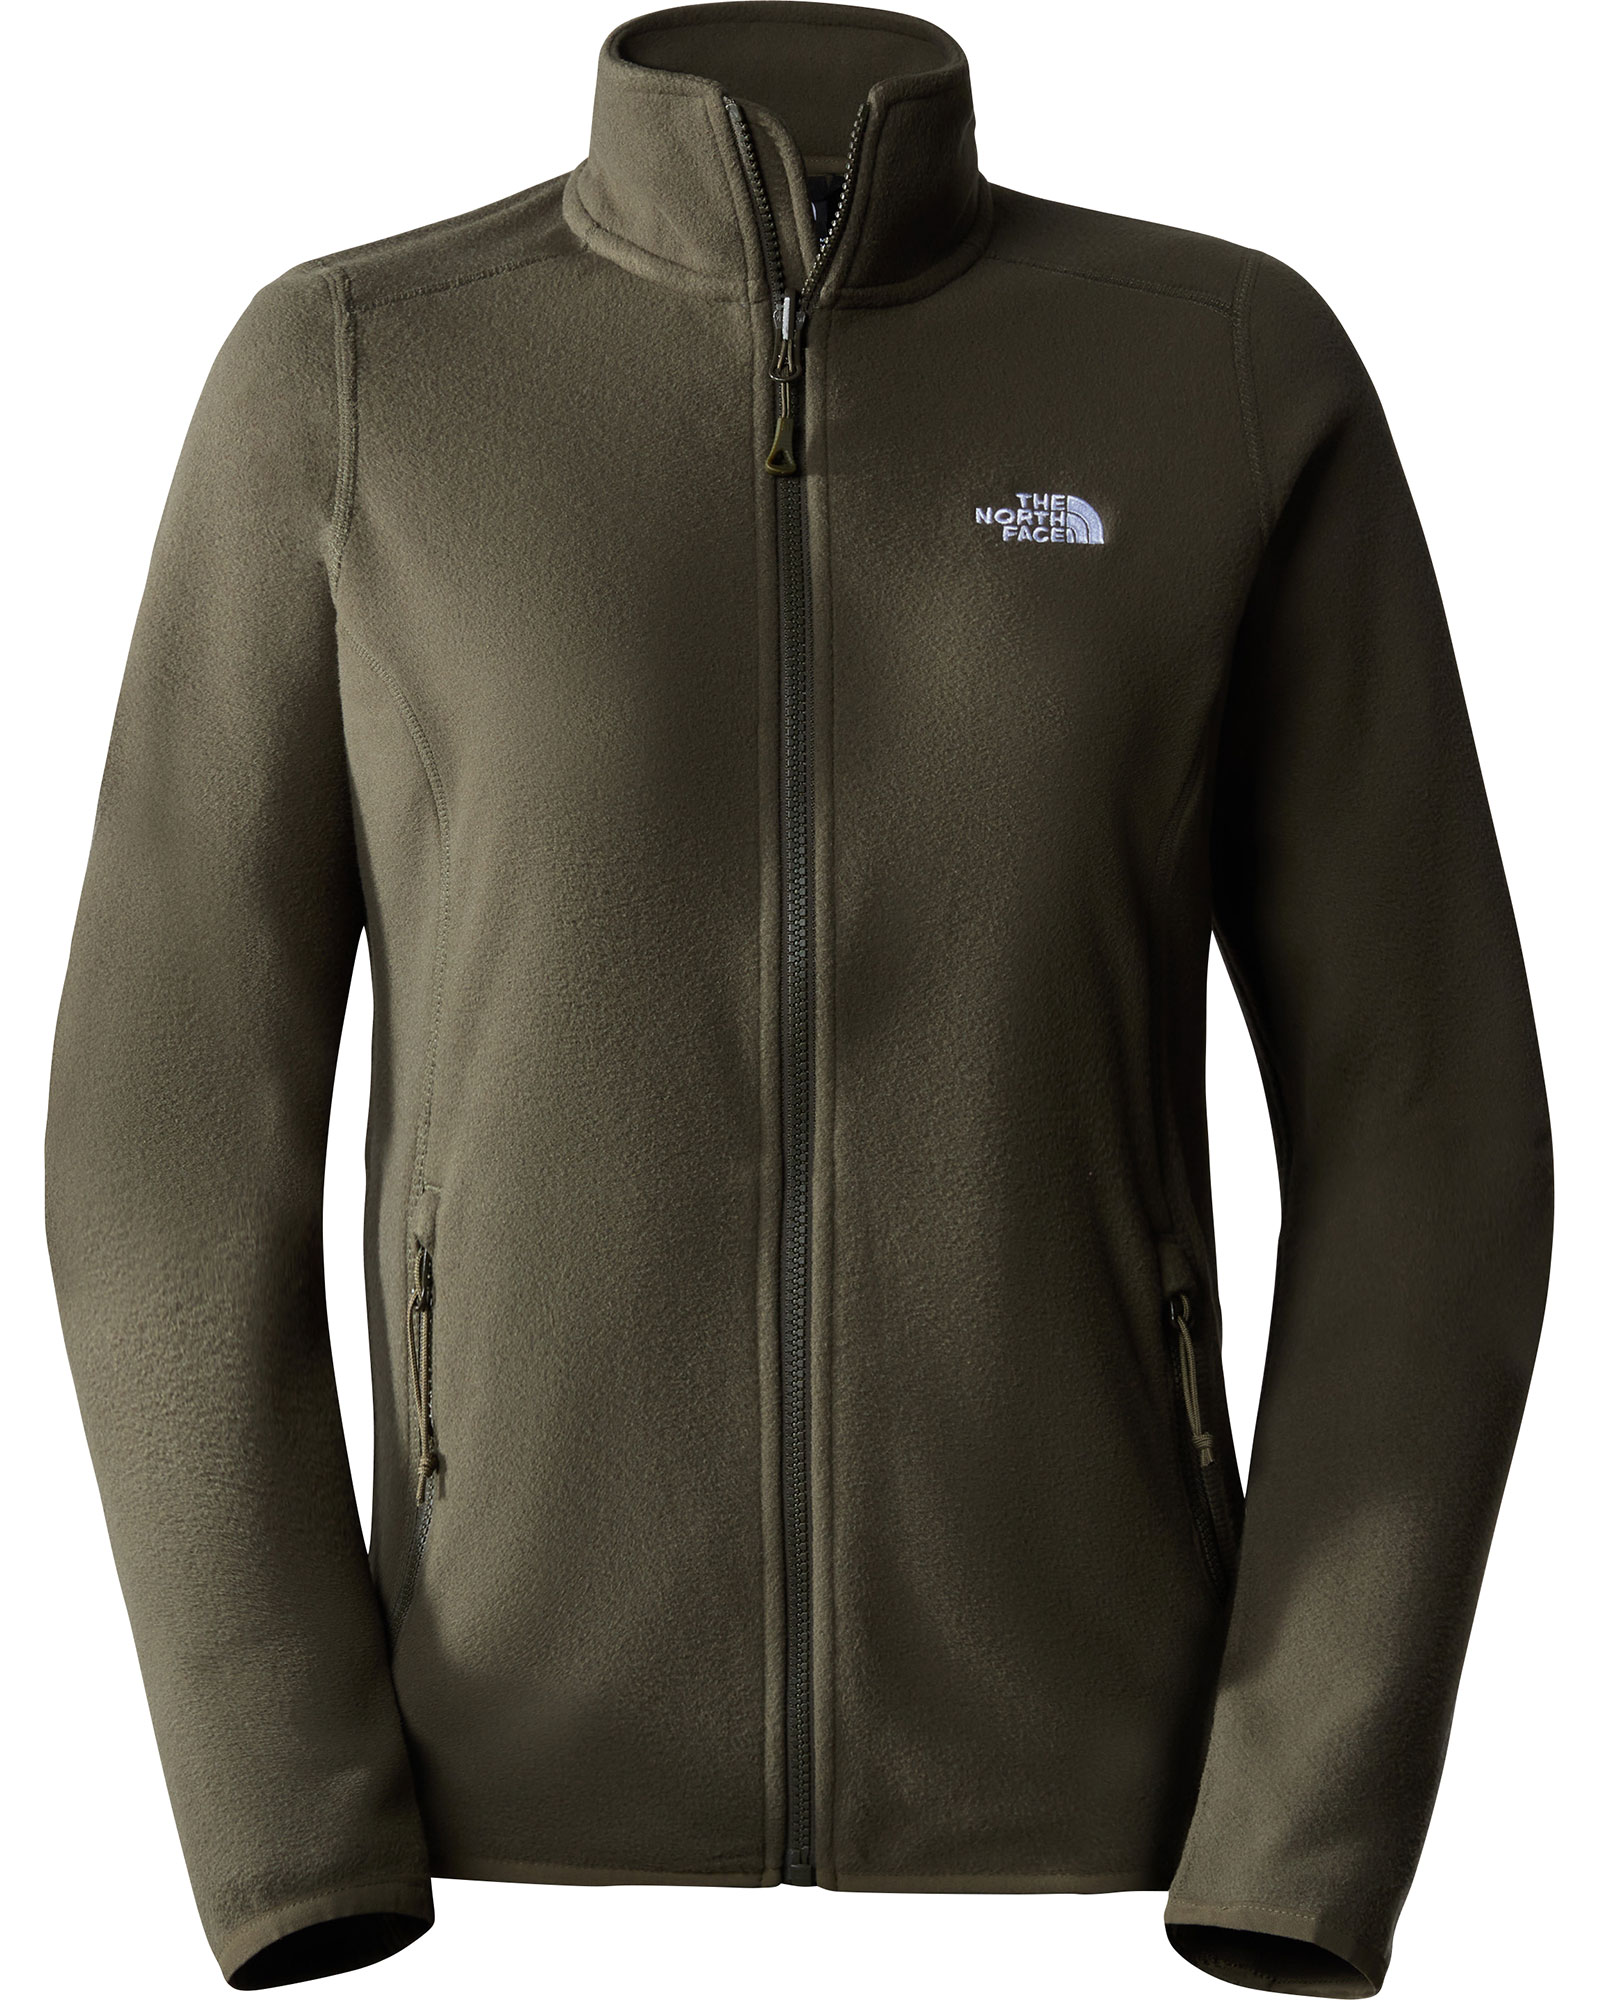 The North Face 100 Glacier Women’s Full Zip - New Taupe Green XS